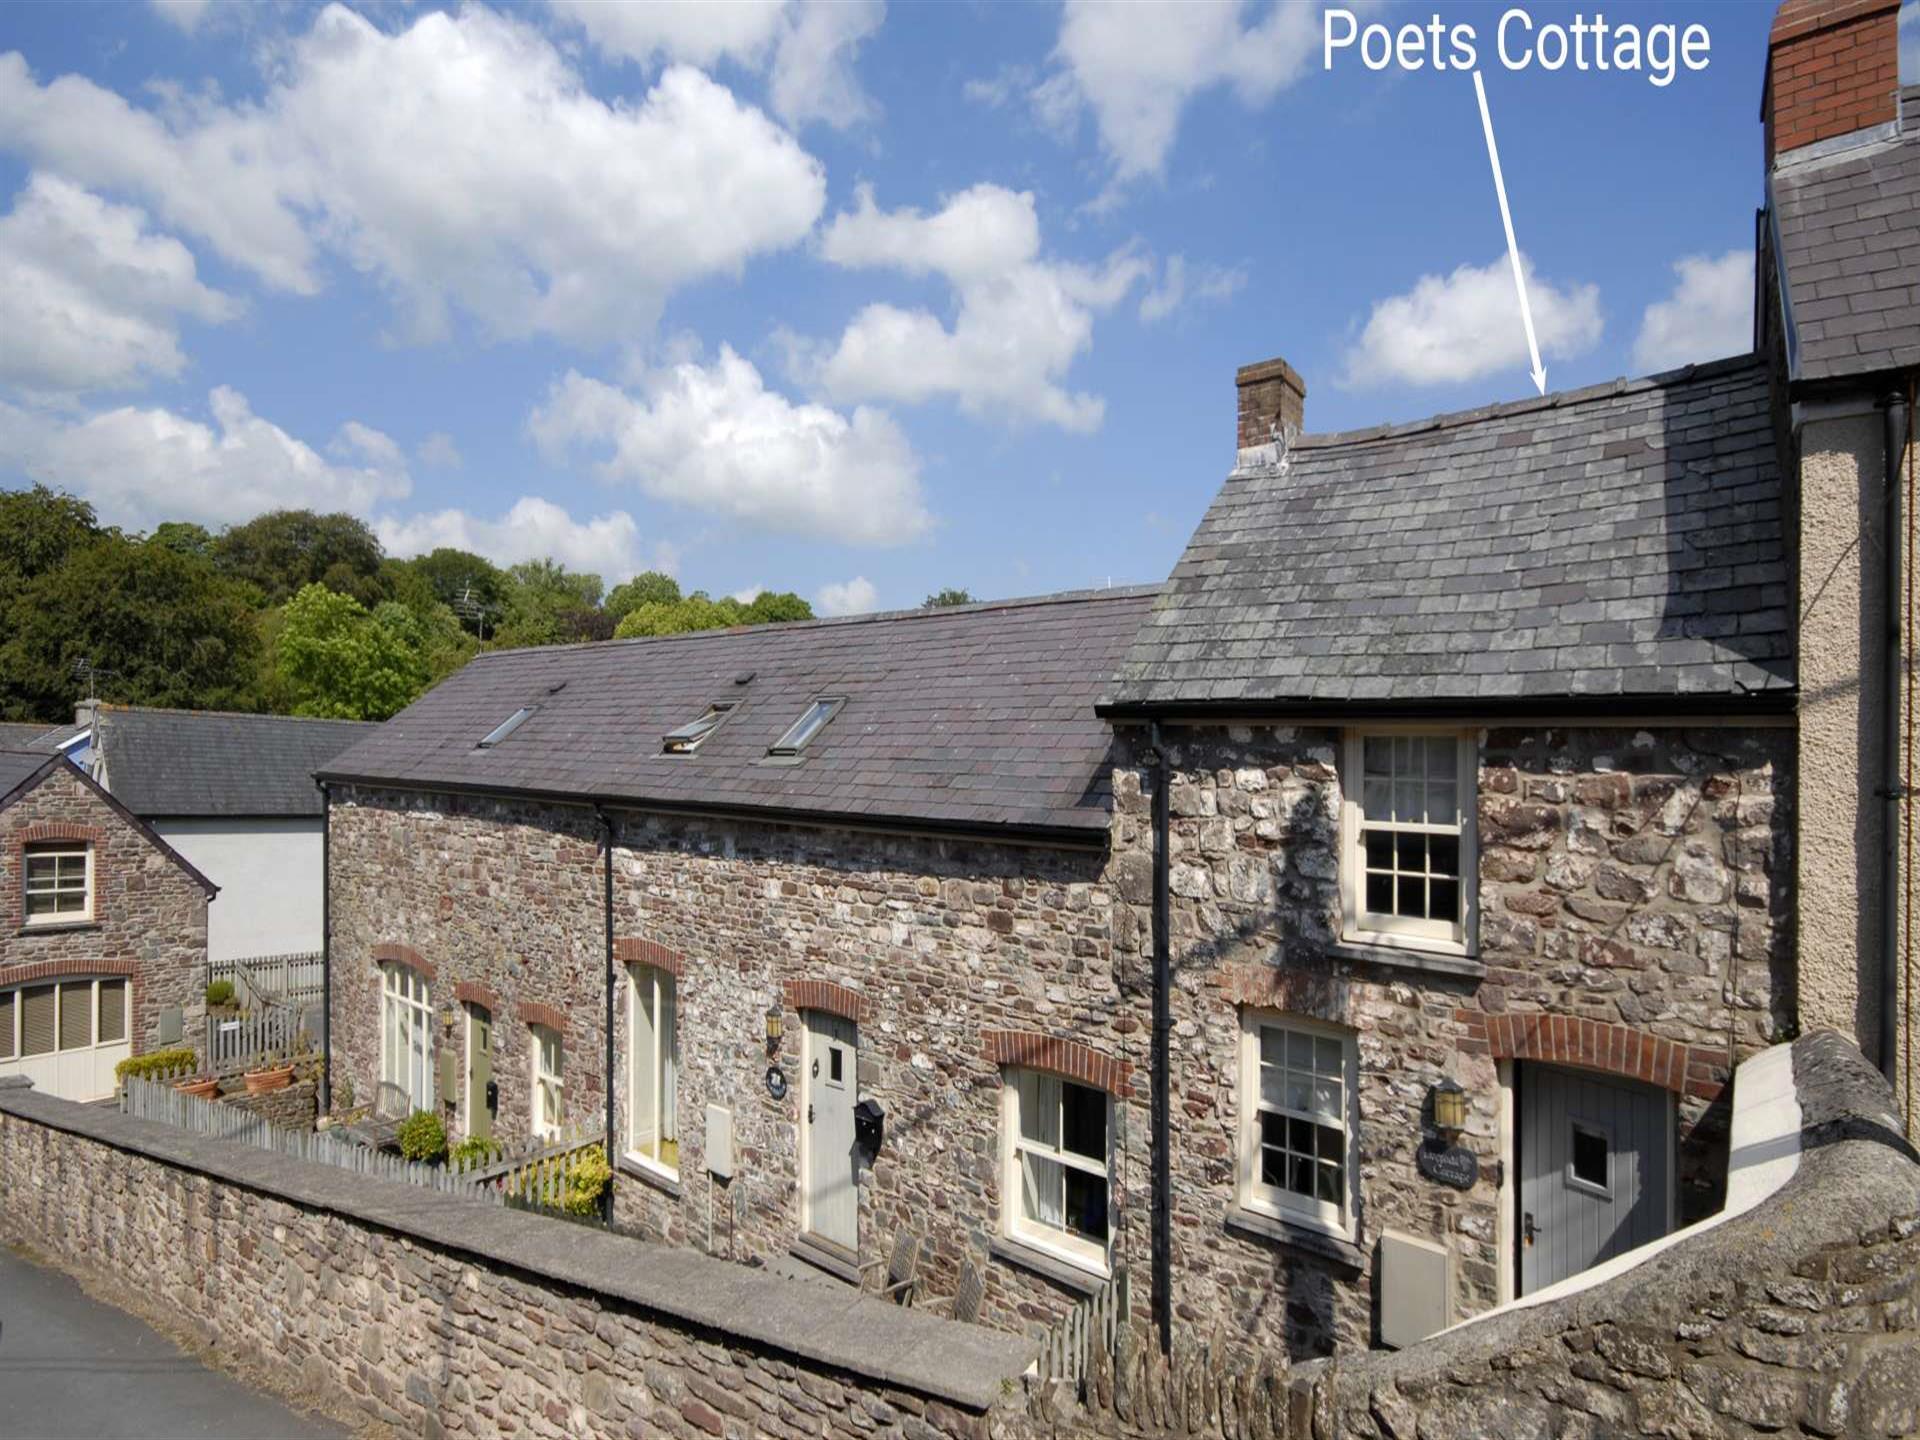 Poets Cottage is a romantic retreat tucked away at